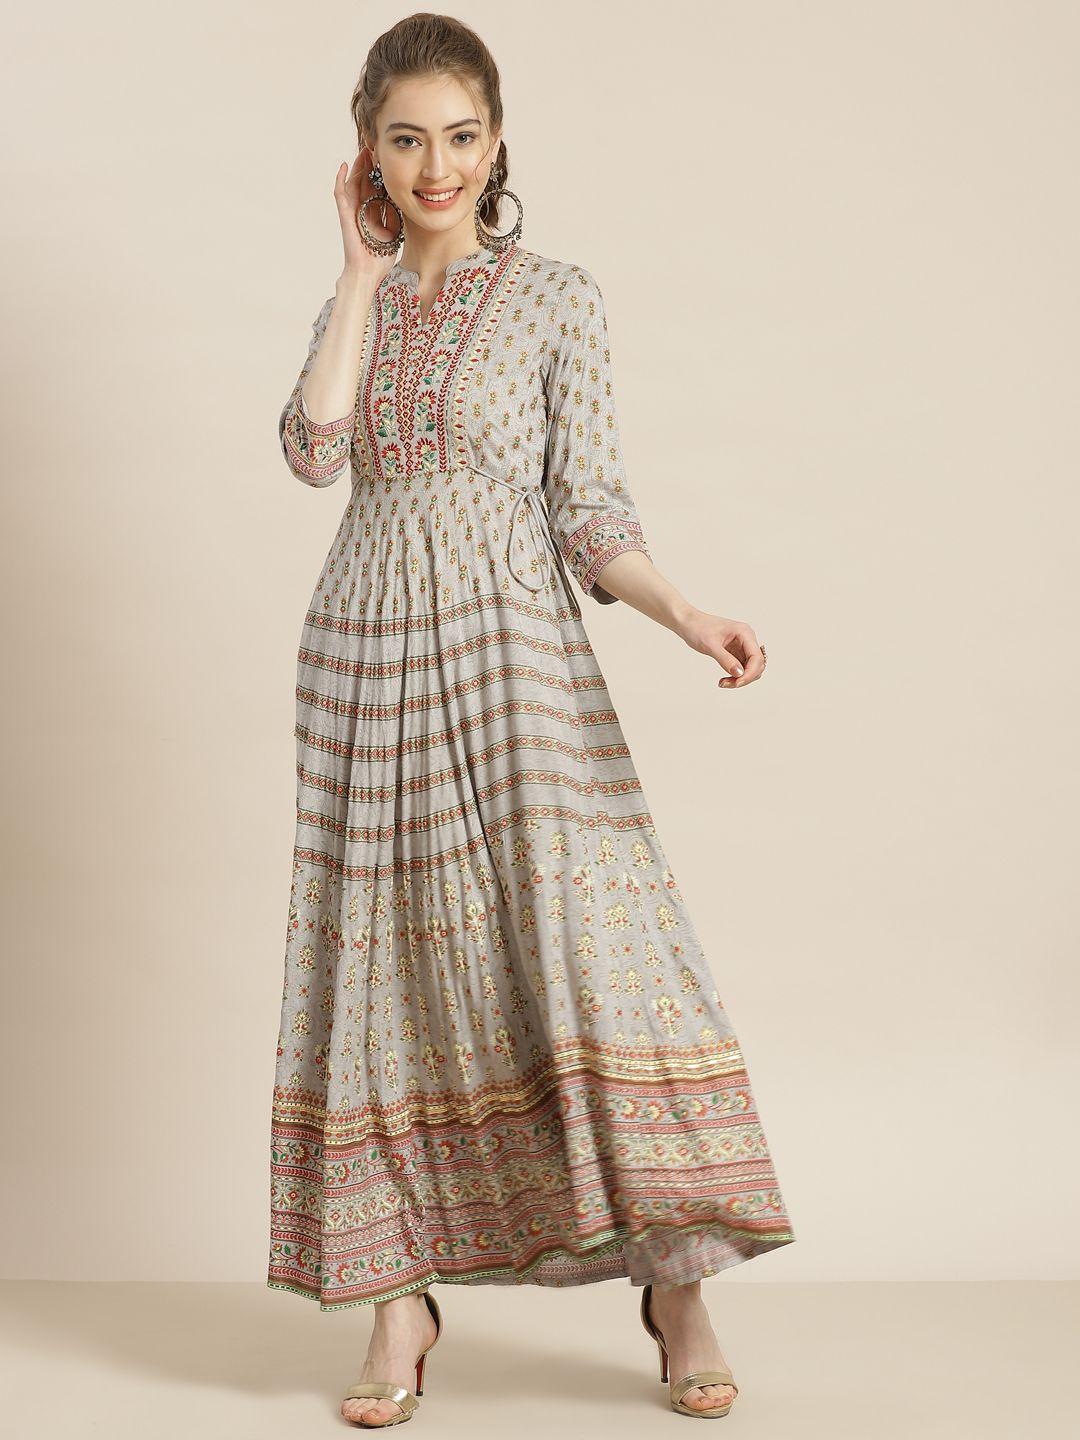 juniper-grey-&-maroon-ethnic-motifs-peinted-liva-ethnic-maxi-dress-with-embroidered-detail